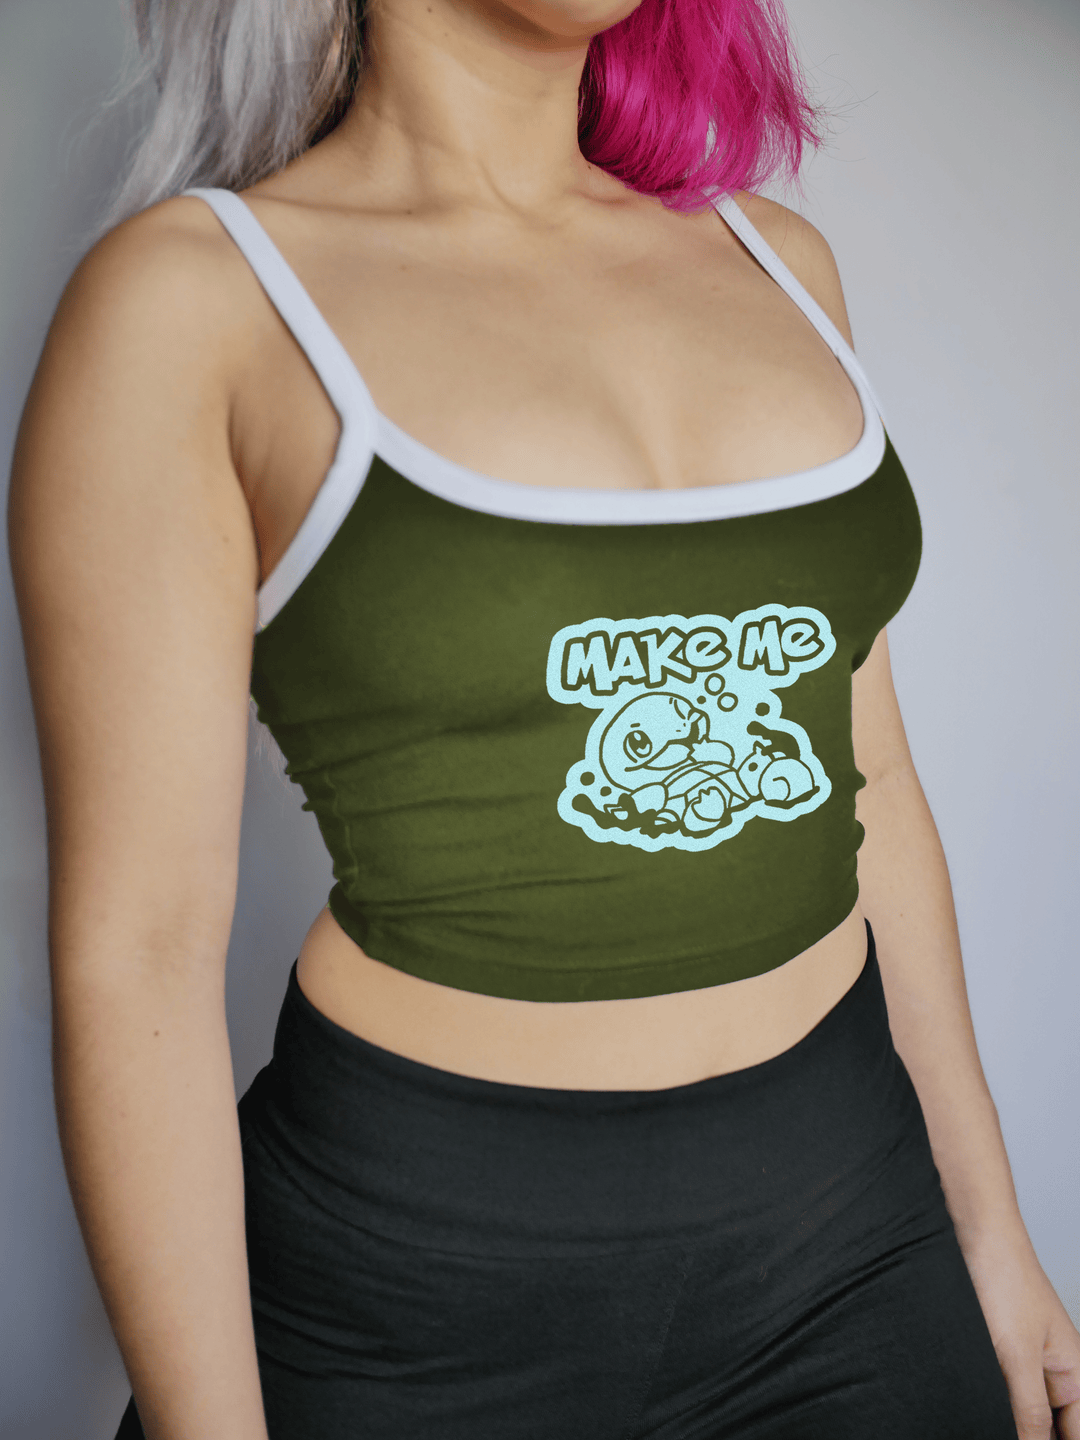 PixelThat Punderwear Tops Olive / S Make Me Squirt-le Crop Top